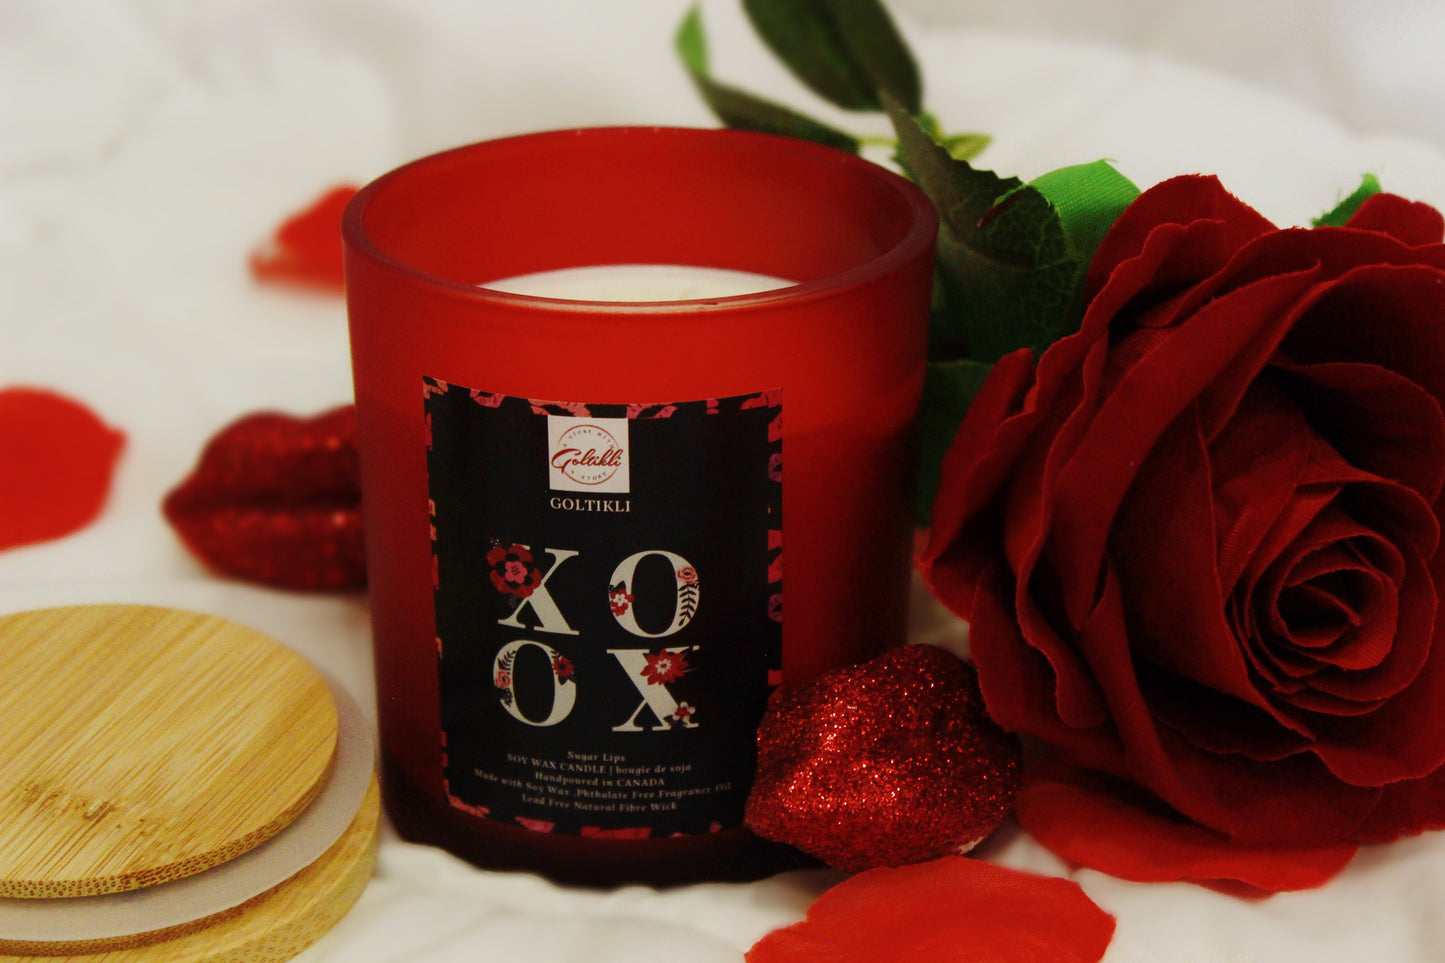 XOXO - Sugar Lips Scented Soy Wax Candle